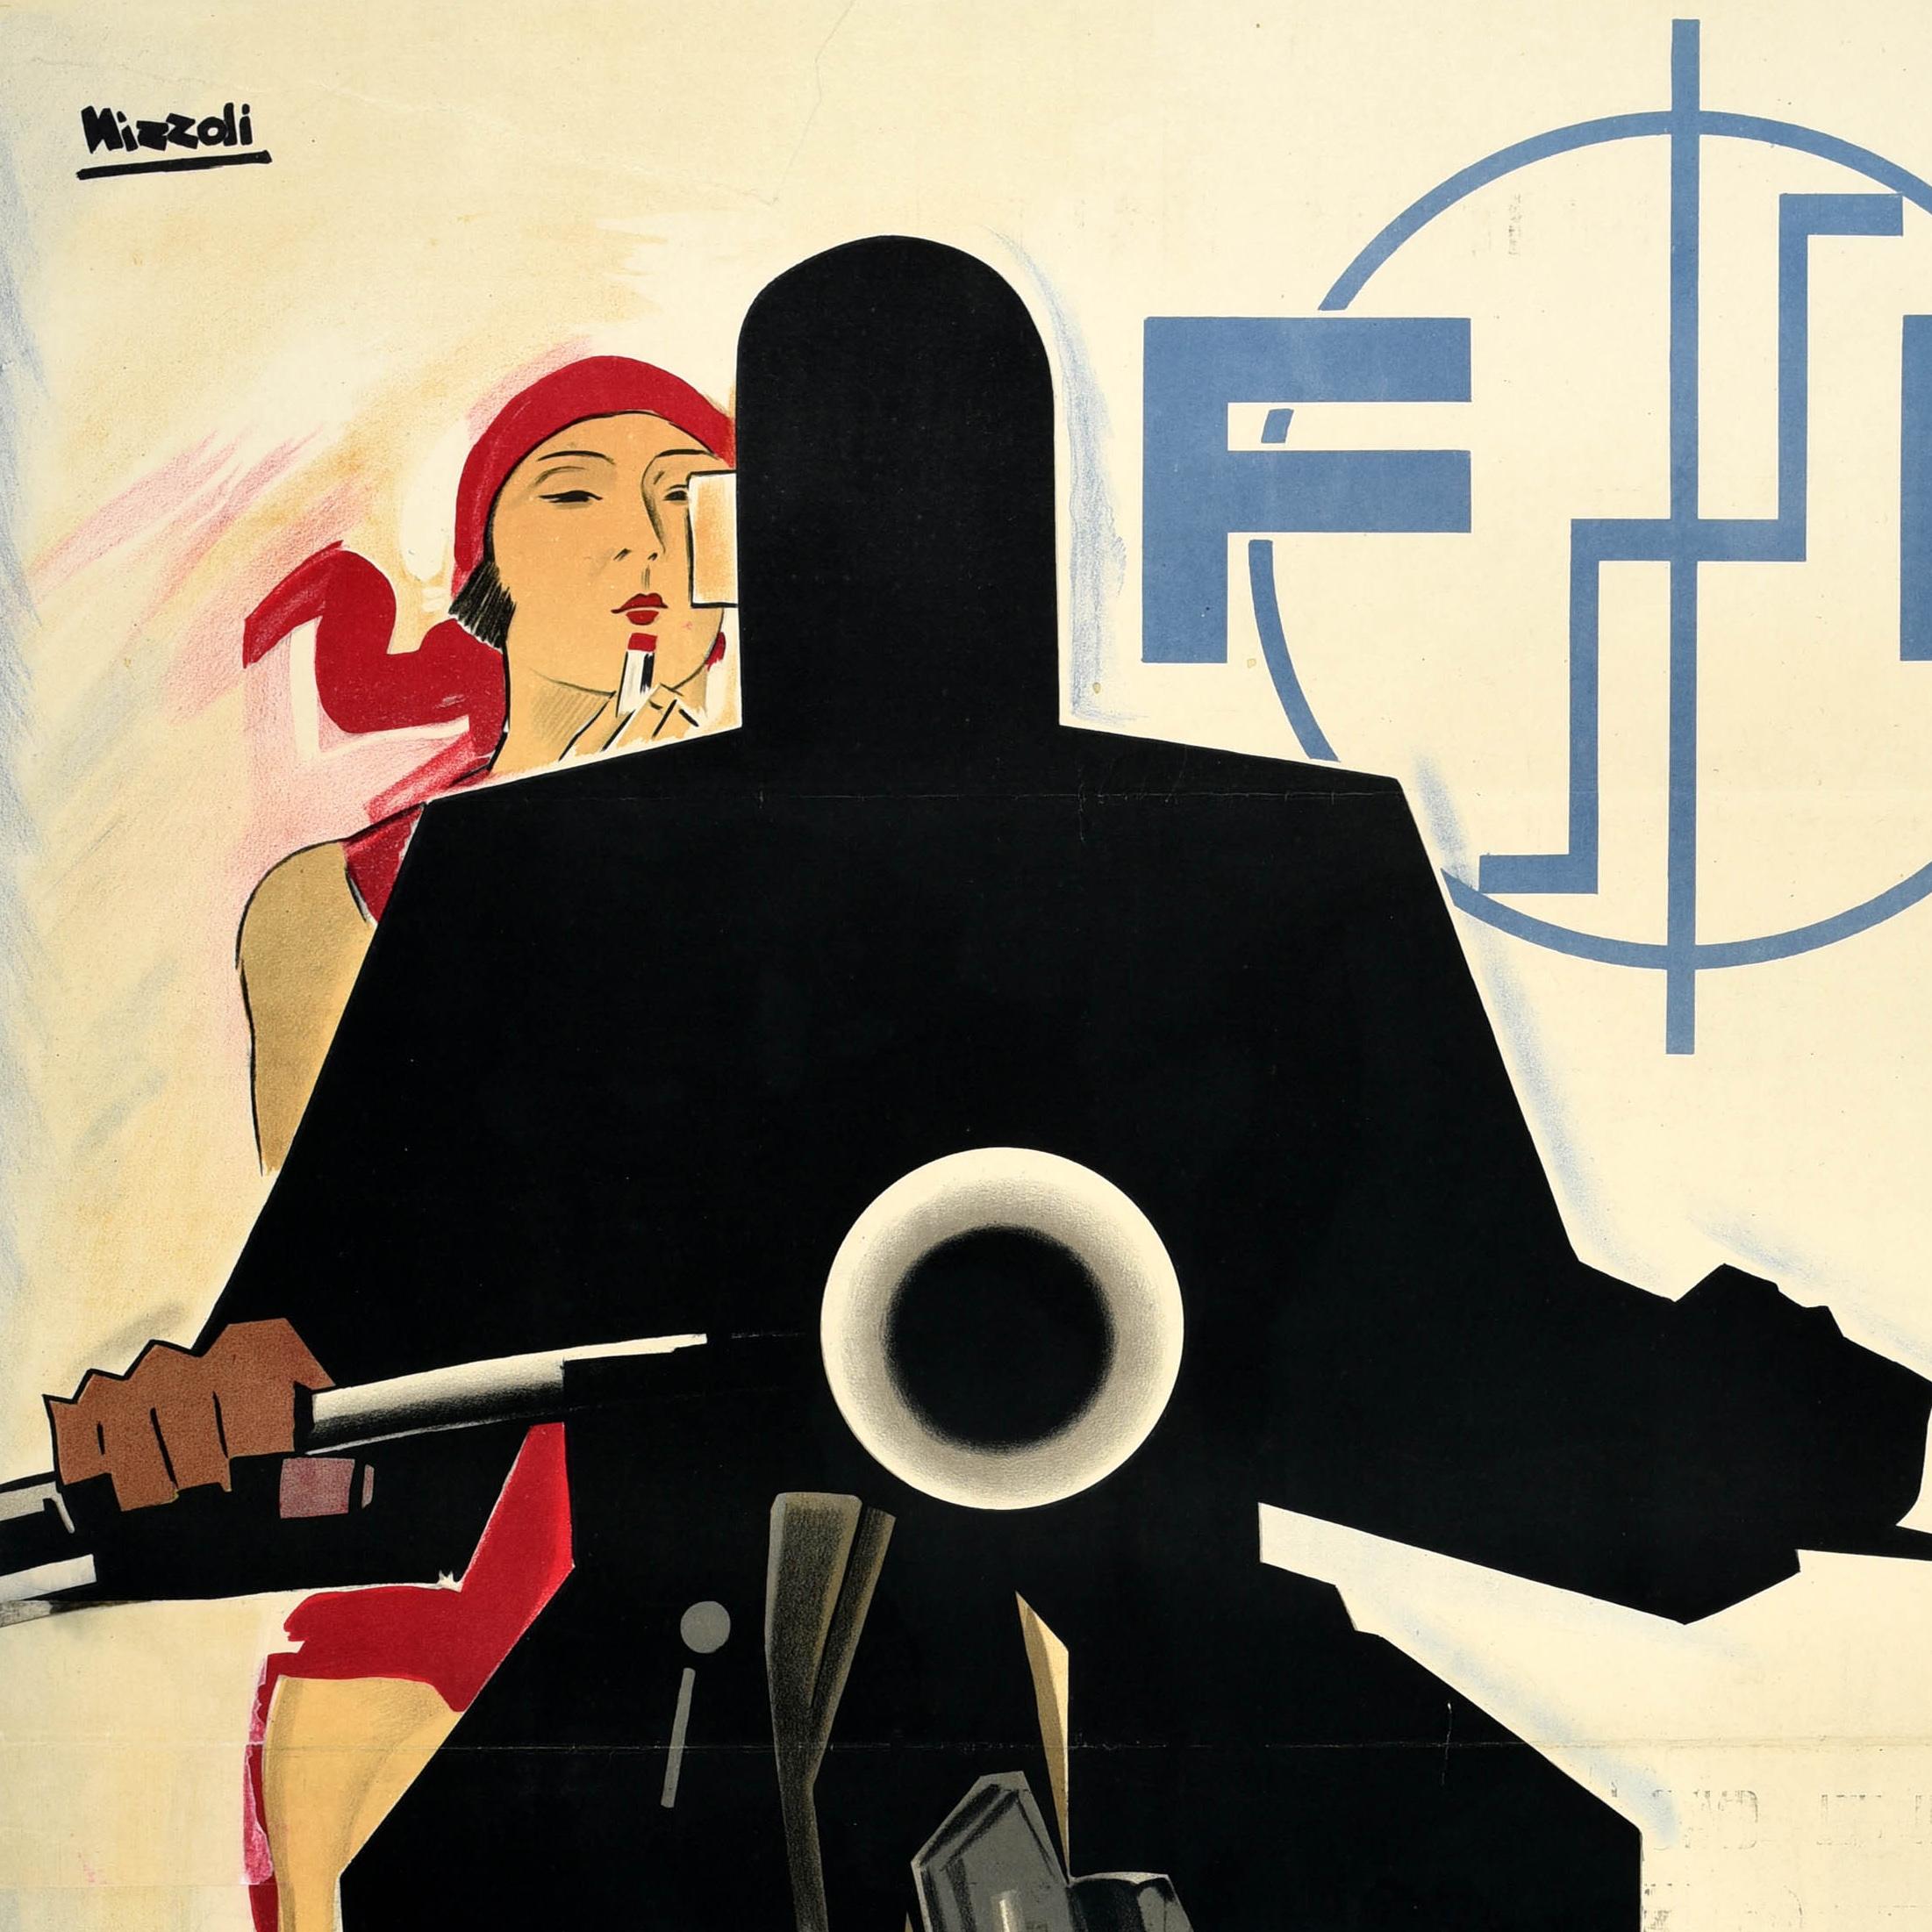 Original vintage advertising poster for Fabrique Nationale Motorcycles featuring an Art Deco design by the Italian artist Marcello Nizzoli (1887-1969) depicting a motorbike rider as a man shrouded in a shadow with a lady in a red headscarf behind